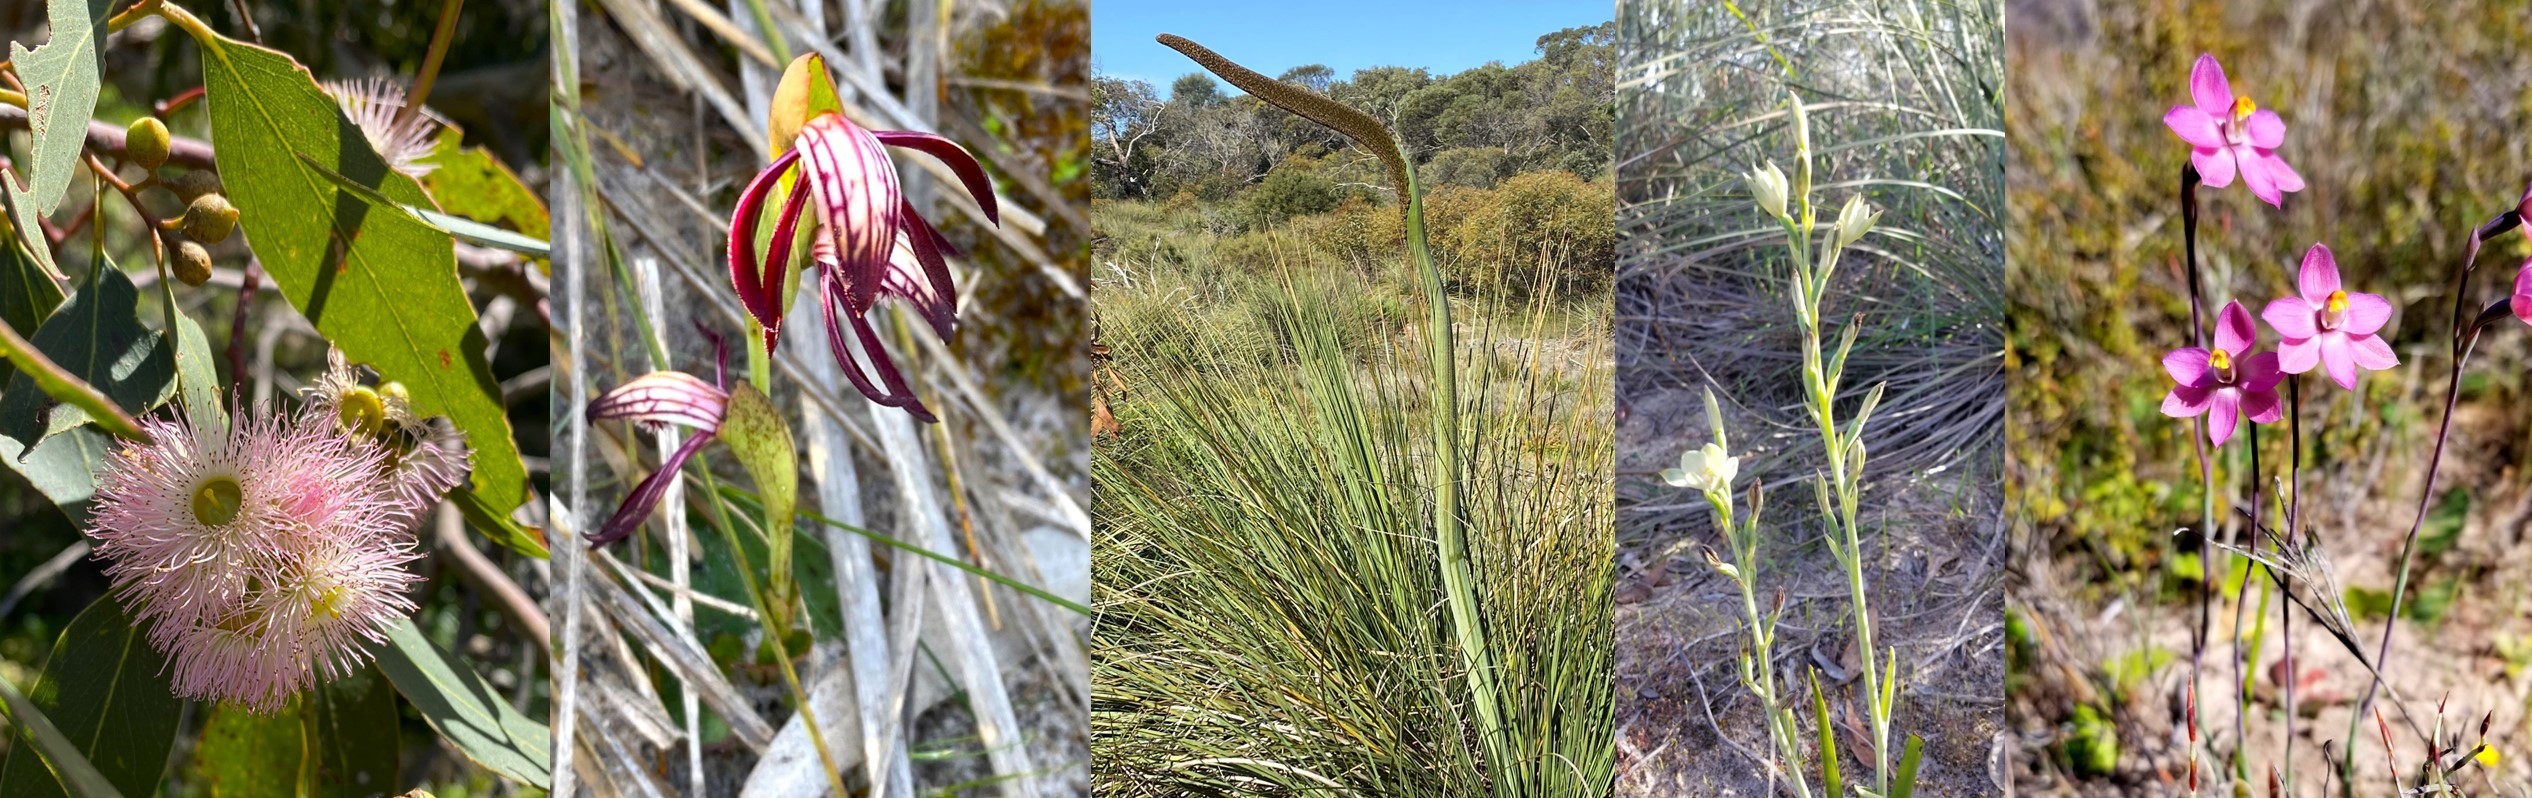 A pink flowering form of Eucalyptus leucoxylon ssp., Pyrorchis nigricans (Fire Orchid or Red beaks), Xanthorrhoea caespitosa (Sand-heath Grass-tree), Thelymitra epipactoides (Metallic Sun-Orchid), Thelymitra rubra (Salmon Sun-Orchid)